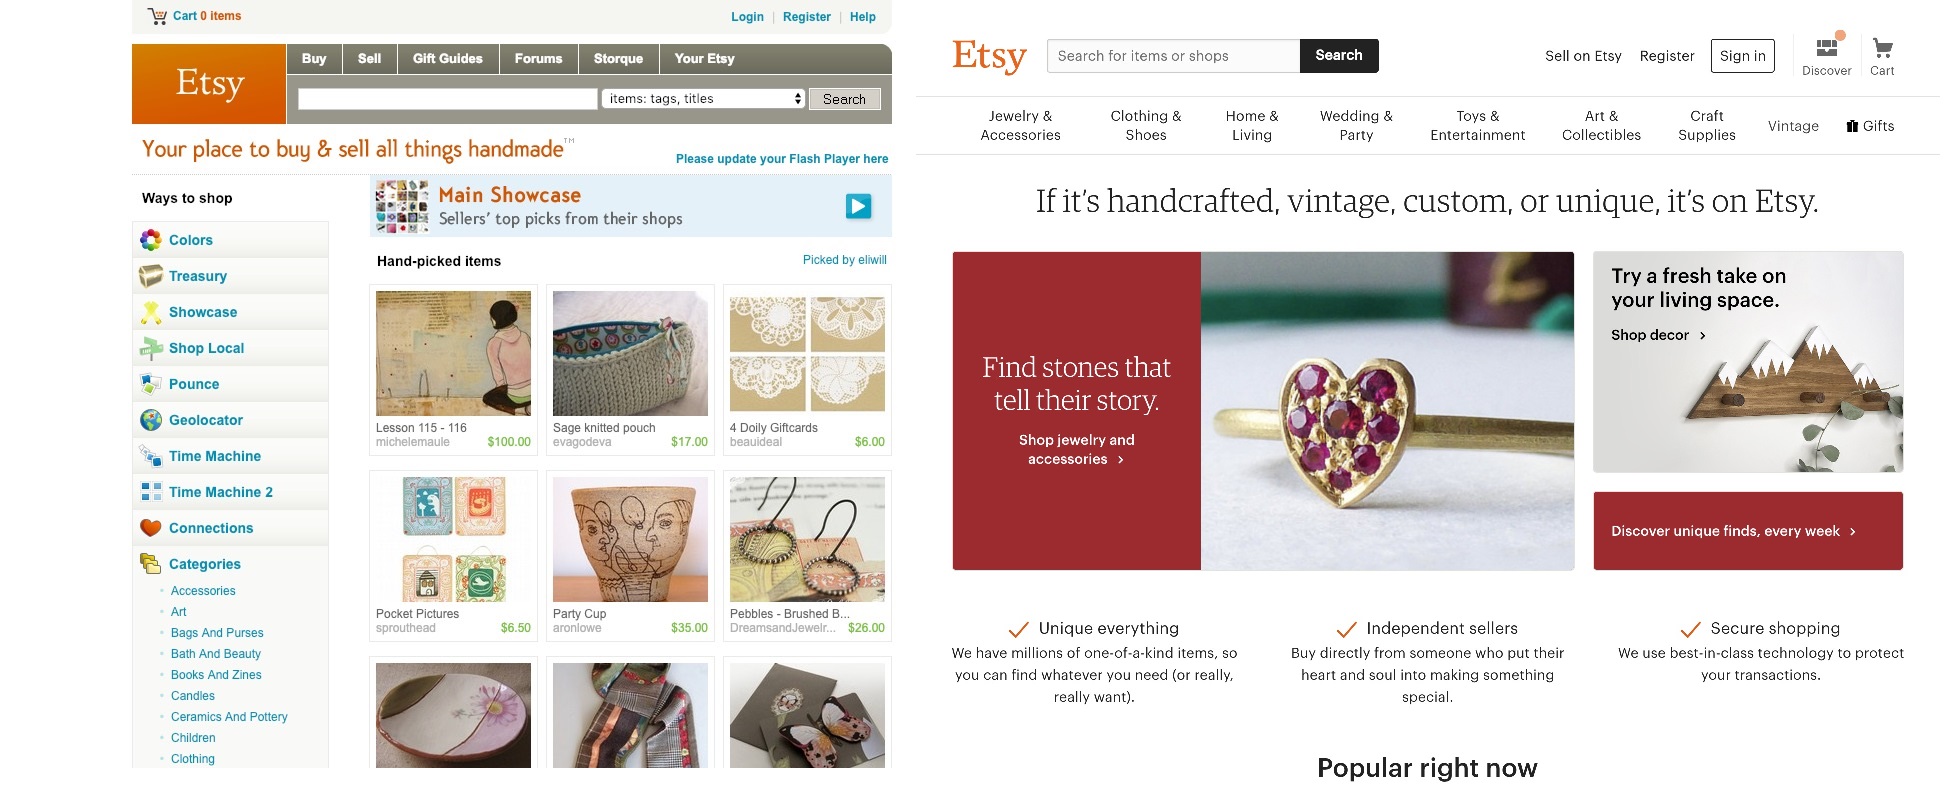 web page - Cart 0 items Login Register Help Buy Sell Gift Guides Forums Storque Your Etsy Search for items or shops Search Sell on Etsy Register Sign in Discover Cart Etsy items tags, titles Search Jewelry & Accessories Clothing & Shoes Home & Living Wedd